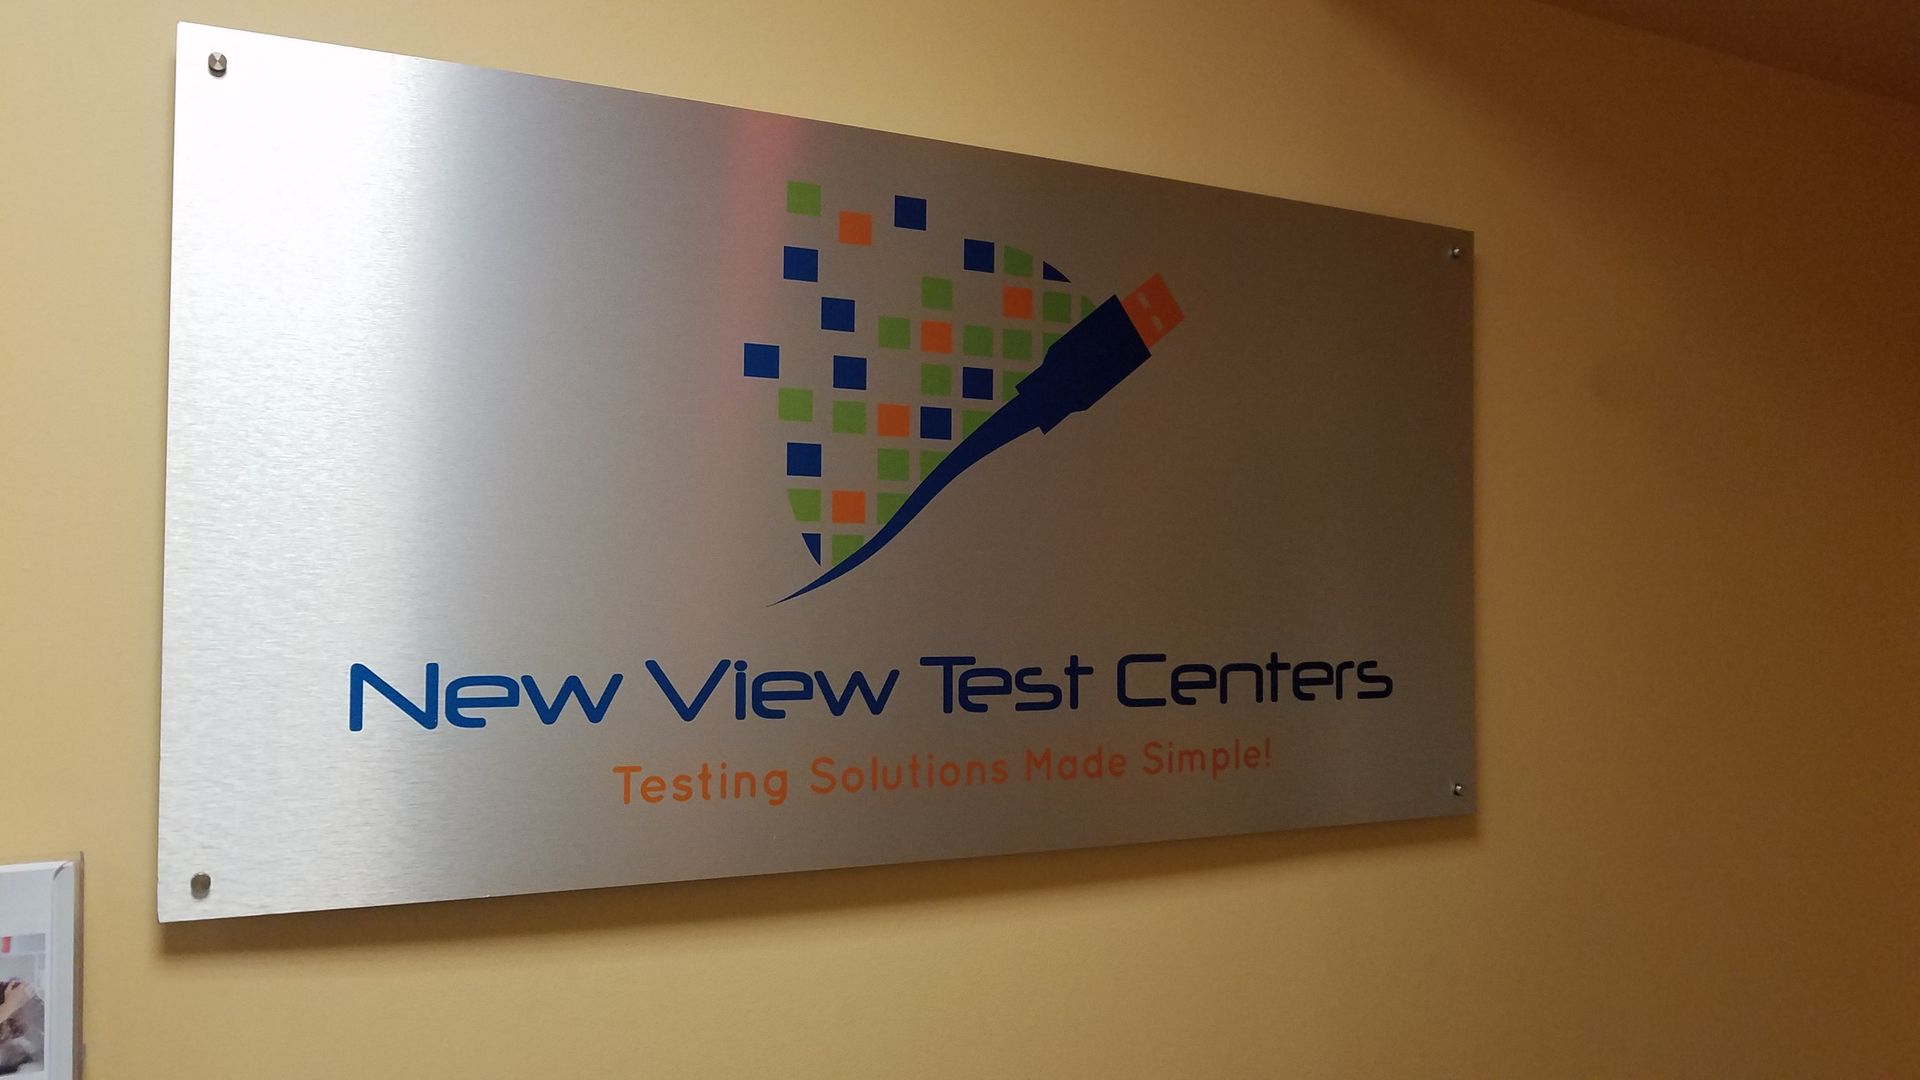 New View Test Centers